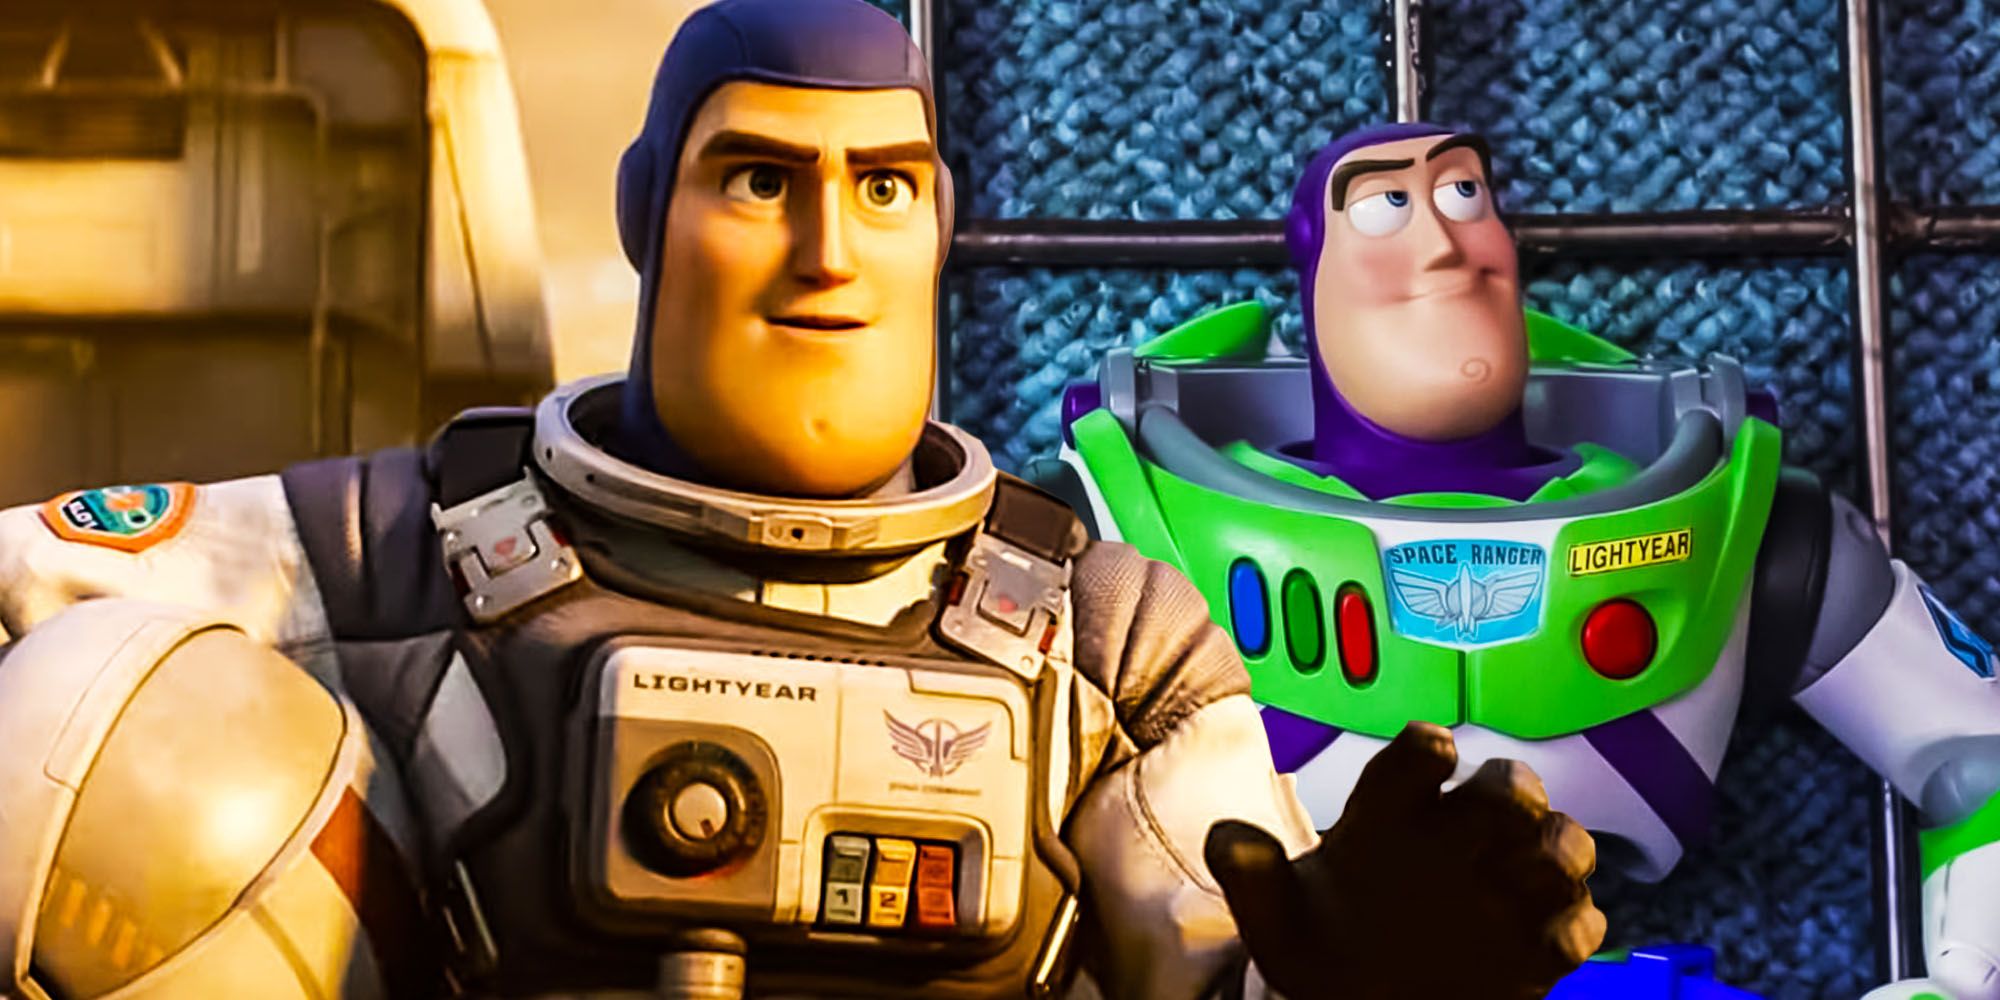 Lightyear answers questions about buzz lightyear the toy story character